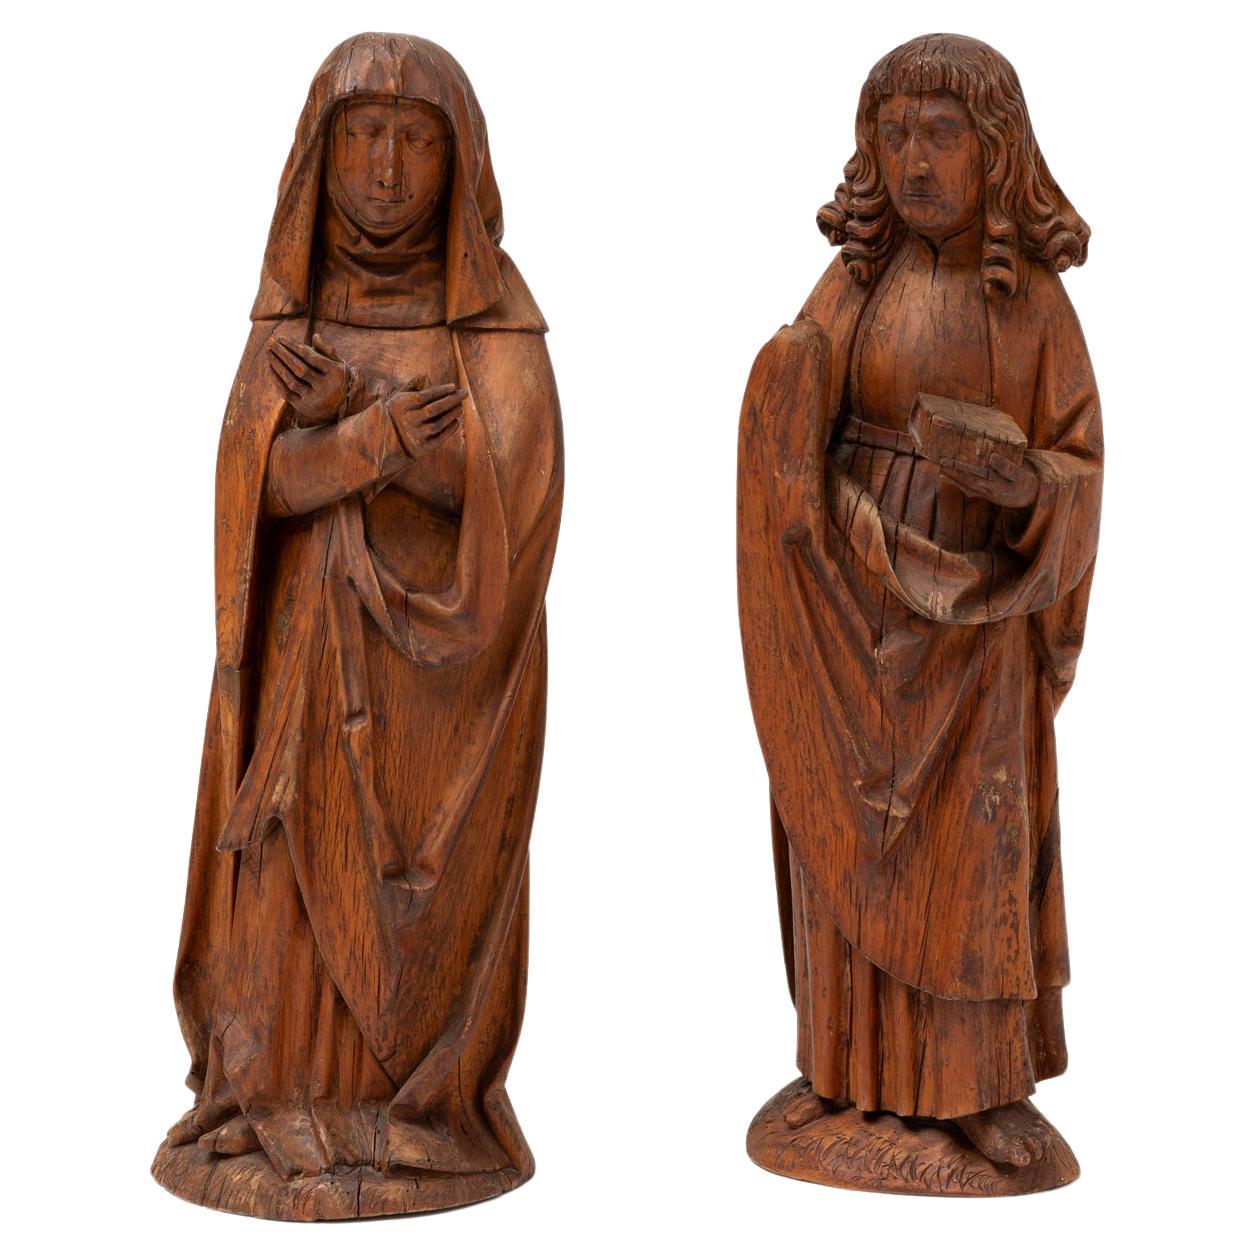 16th Century Virgin Mary and Saint John, Pair of Linden Wood Sculptures For Sale